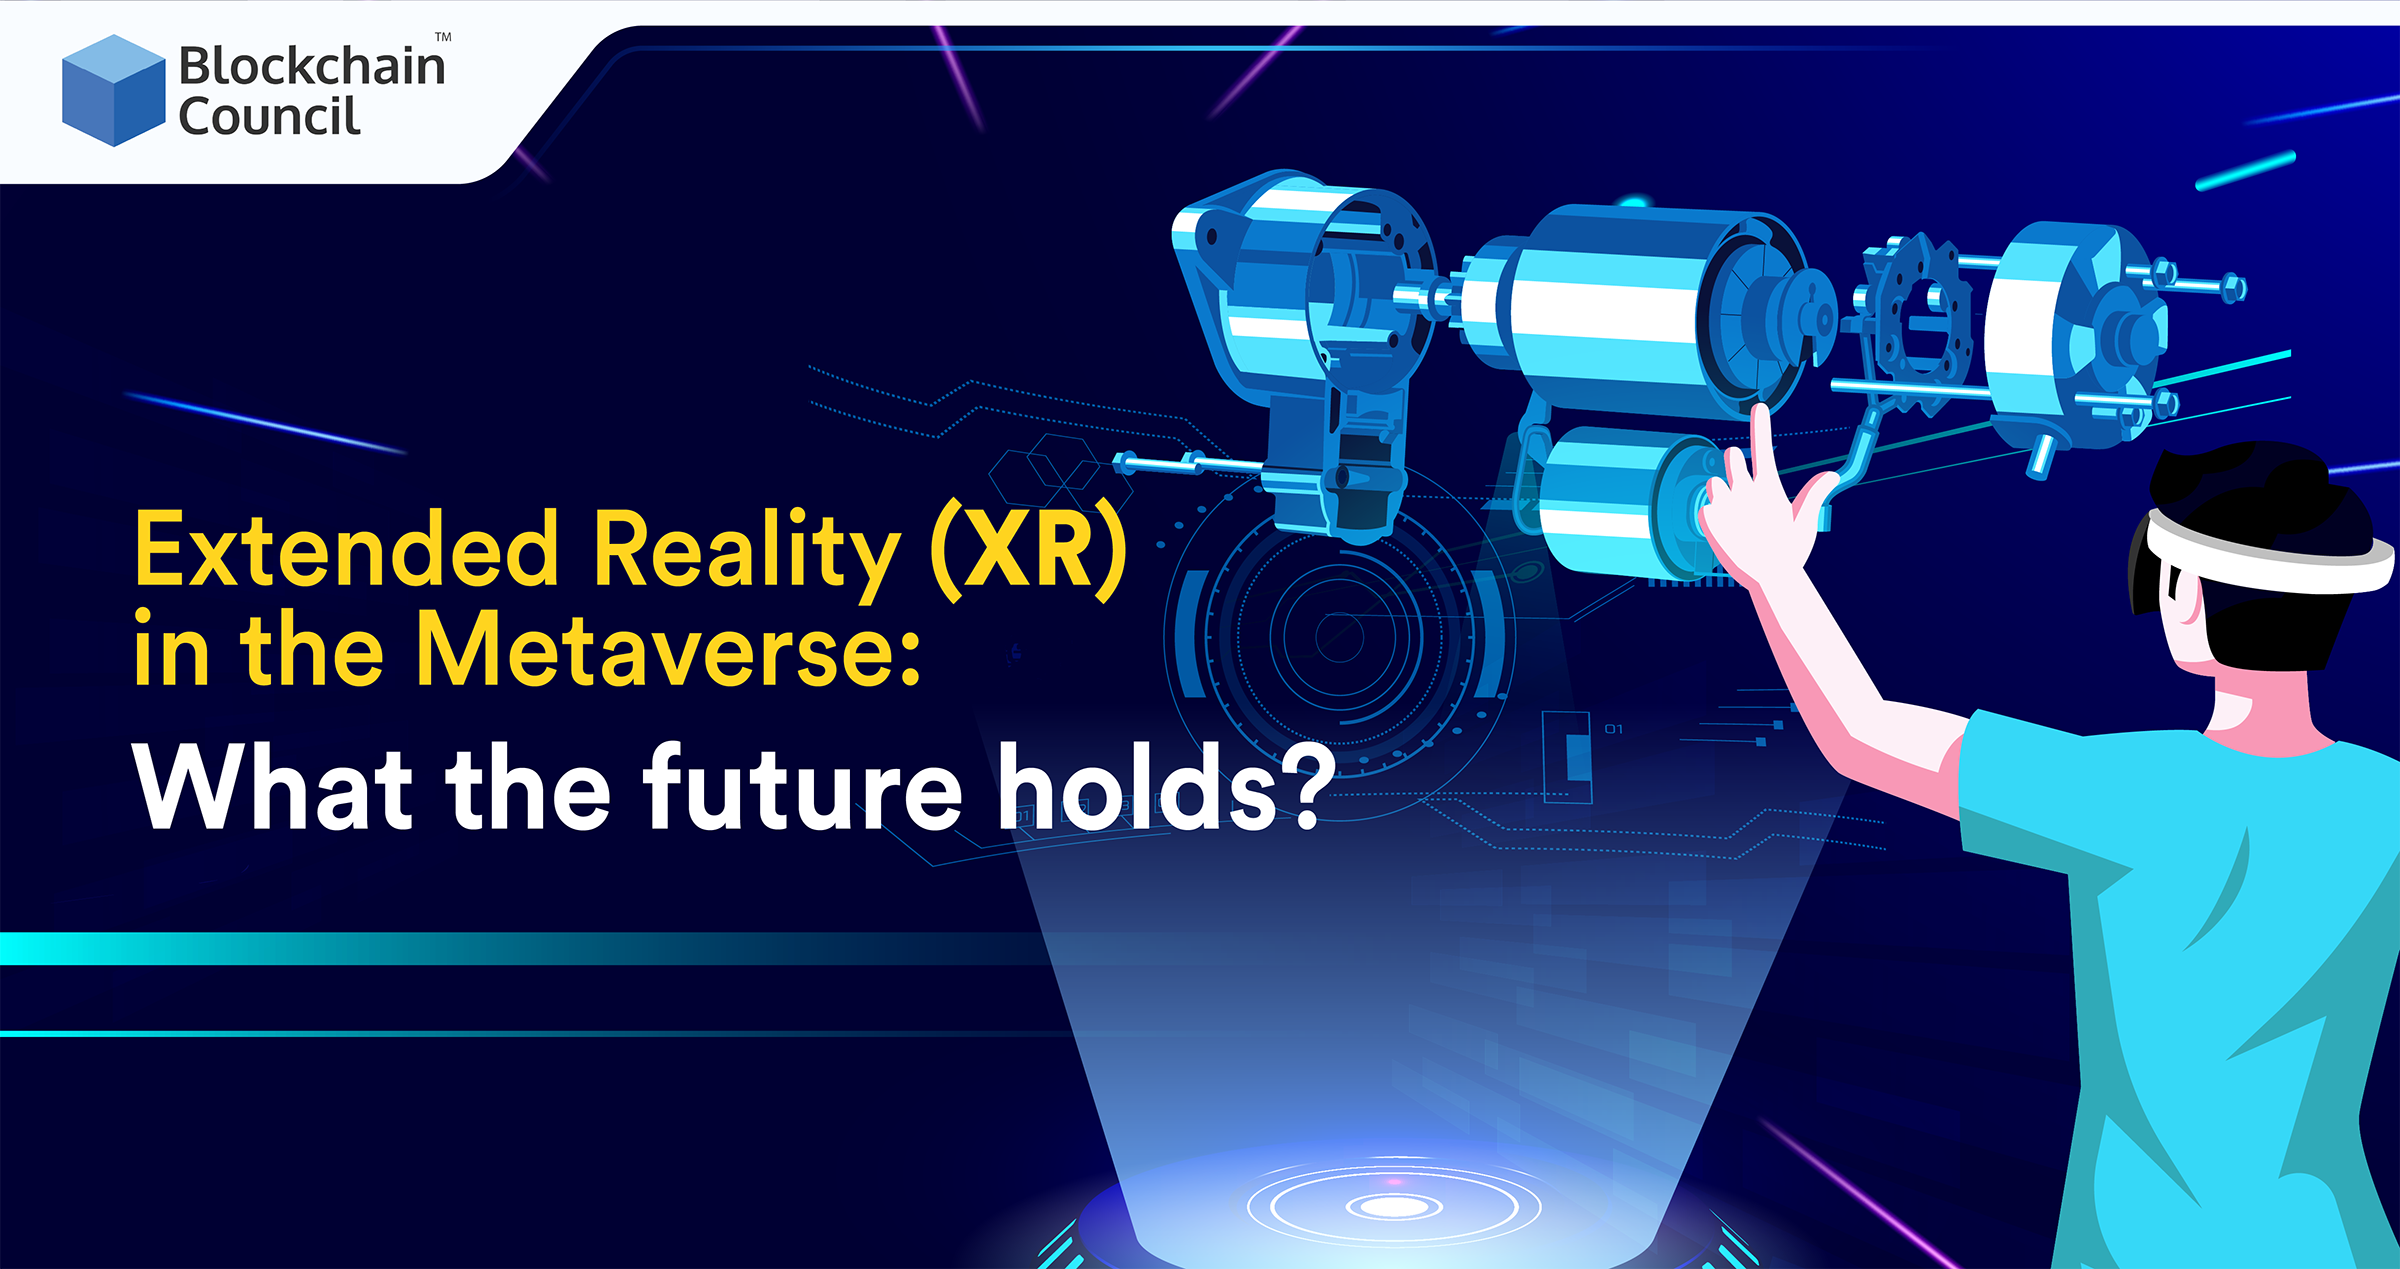 Extended Reality (XR) in the Metaverse: What the future holds?